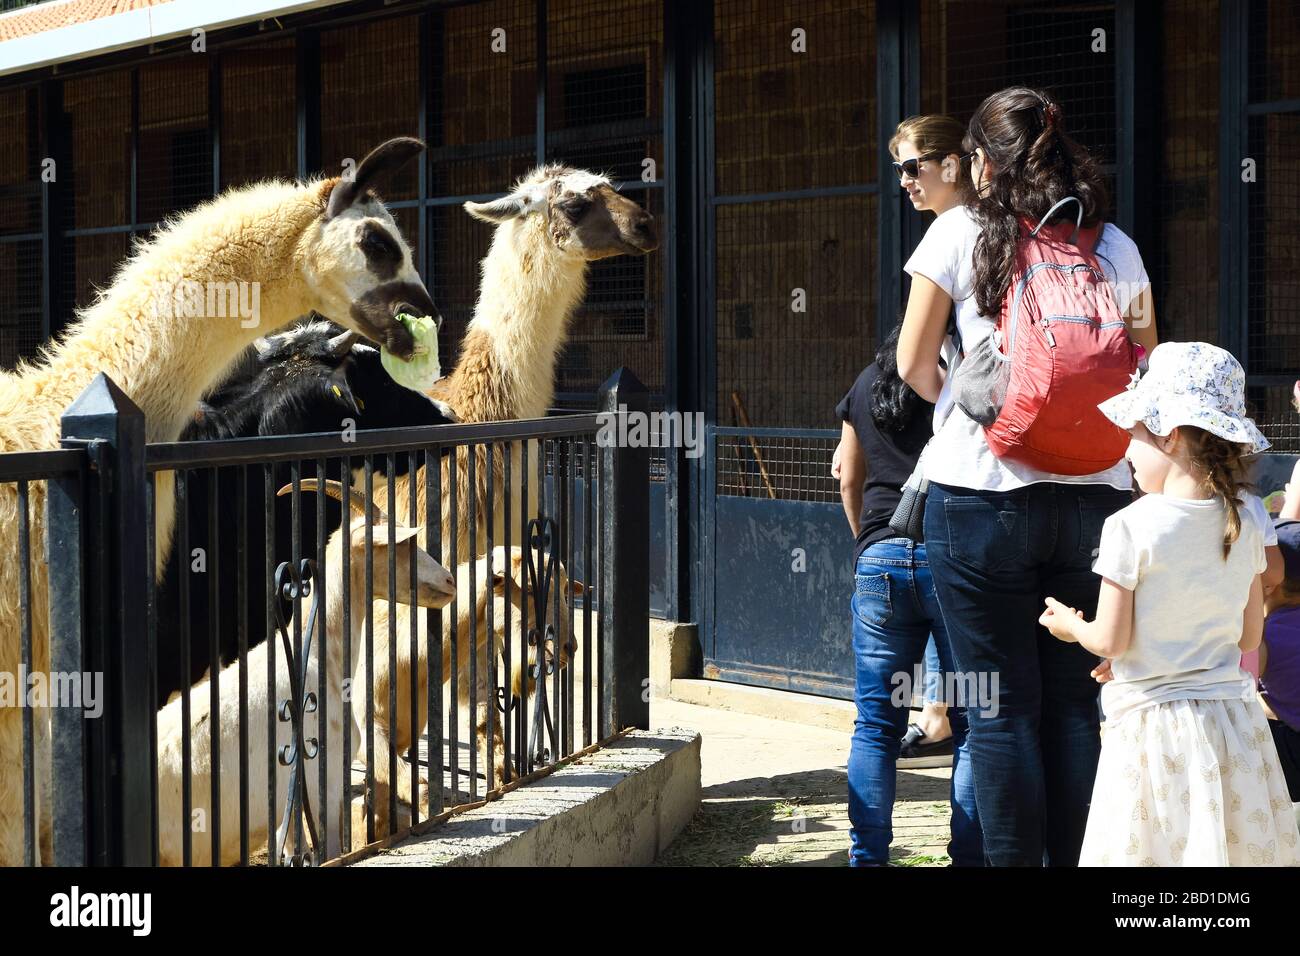 Mar Chaaya, Lebanon - May 27, 2017: Parents with their kids visiting the zoo in the leisure time. Stock Photo